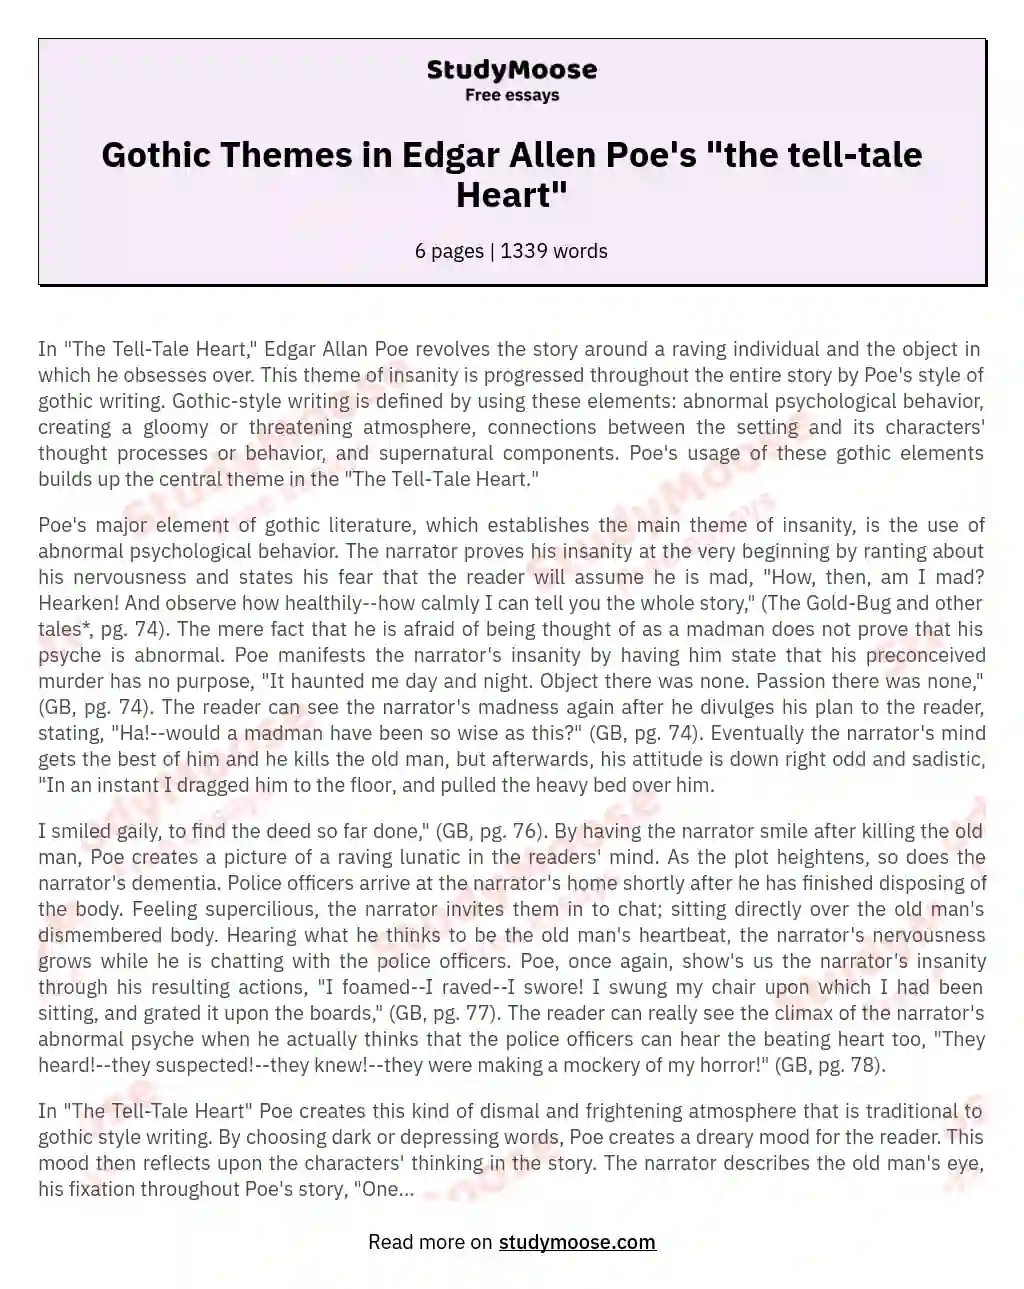 Gothic Themes in Edgar Allen Poe's "the tell-tale Heart" essay